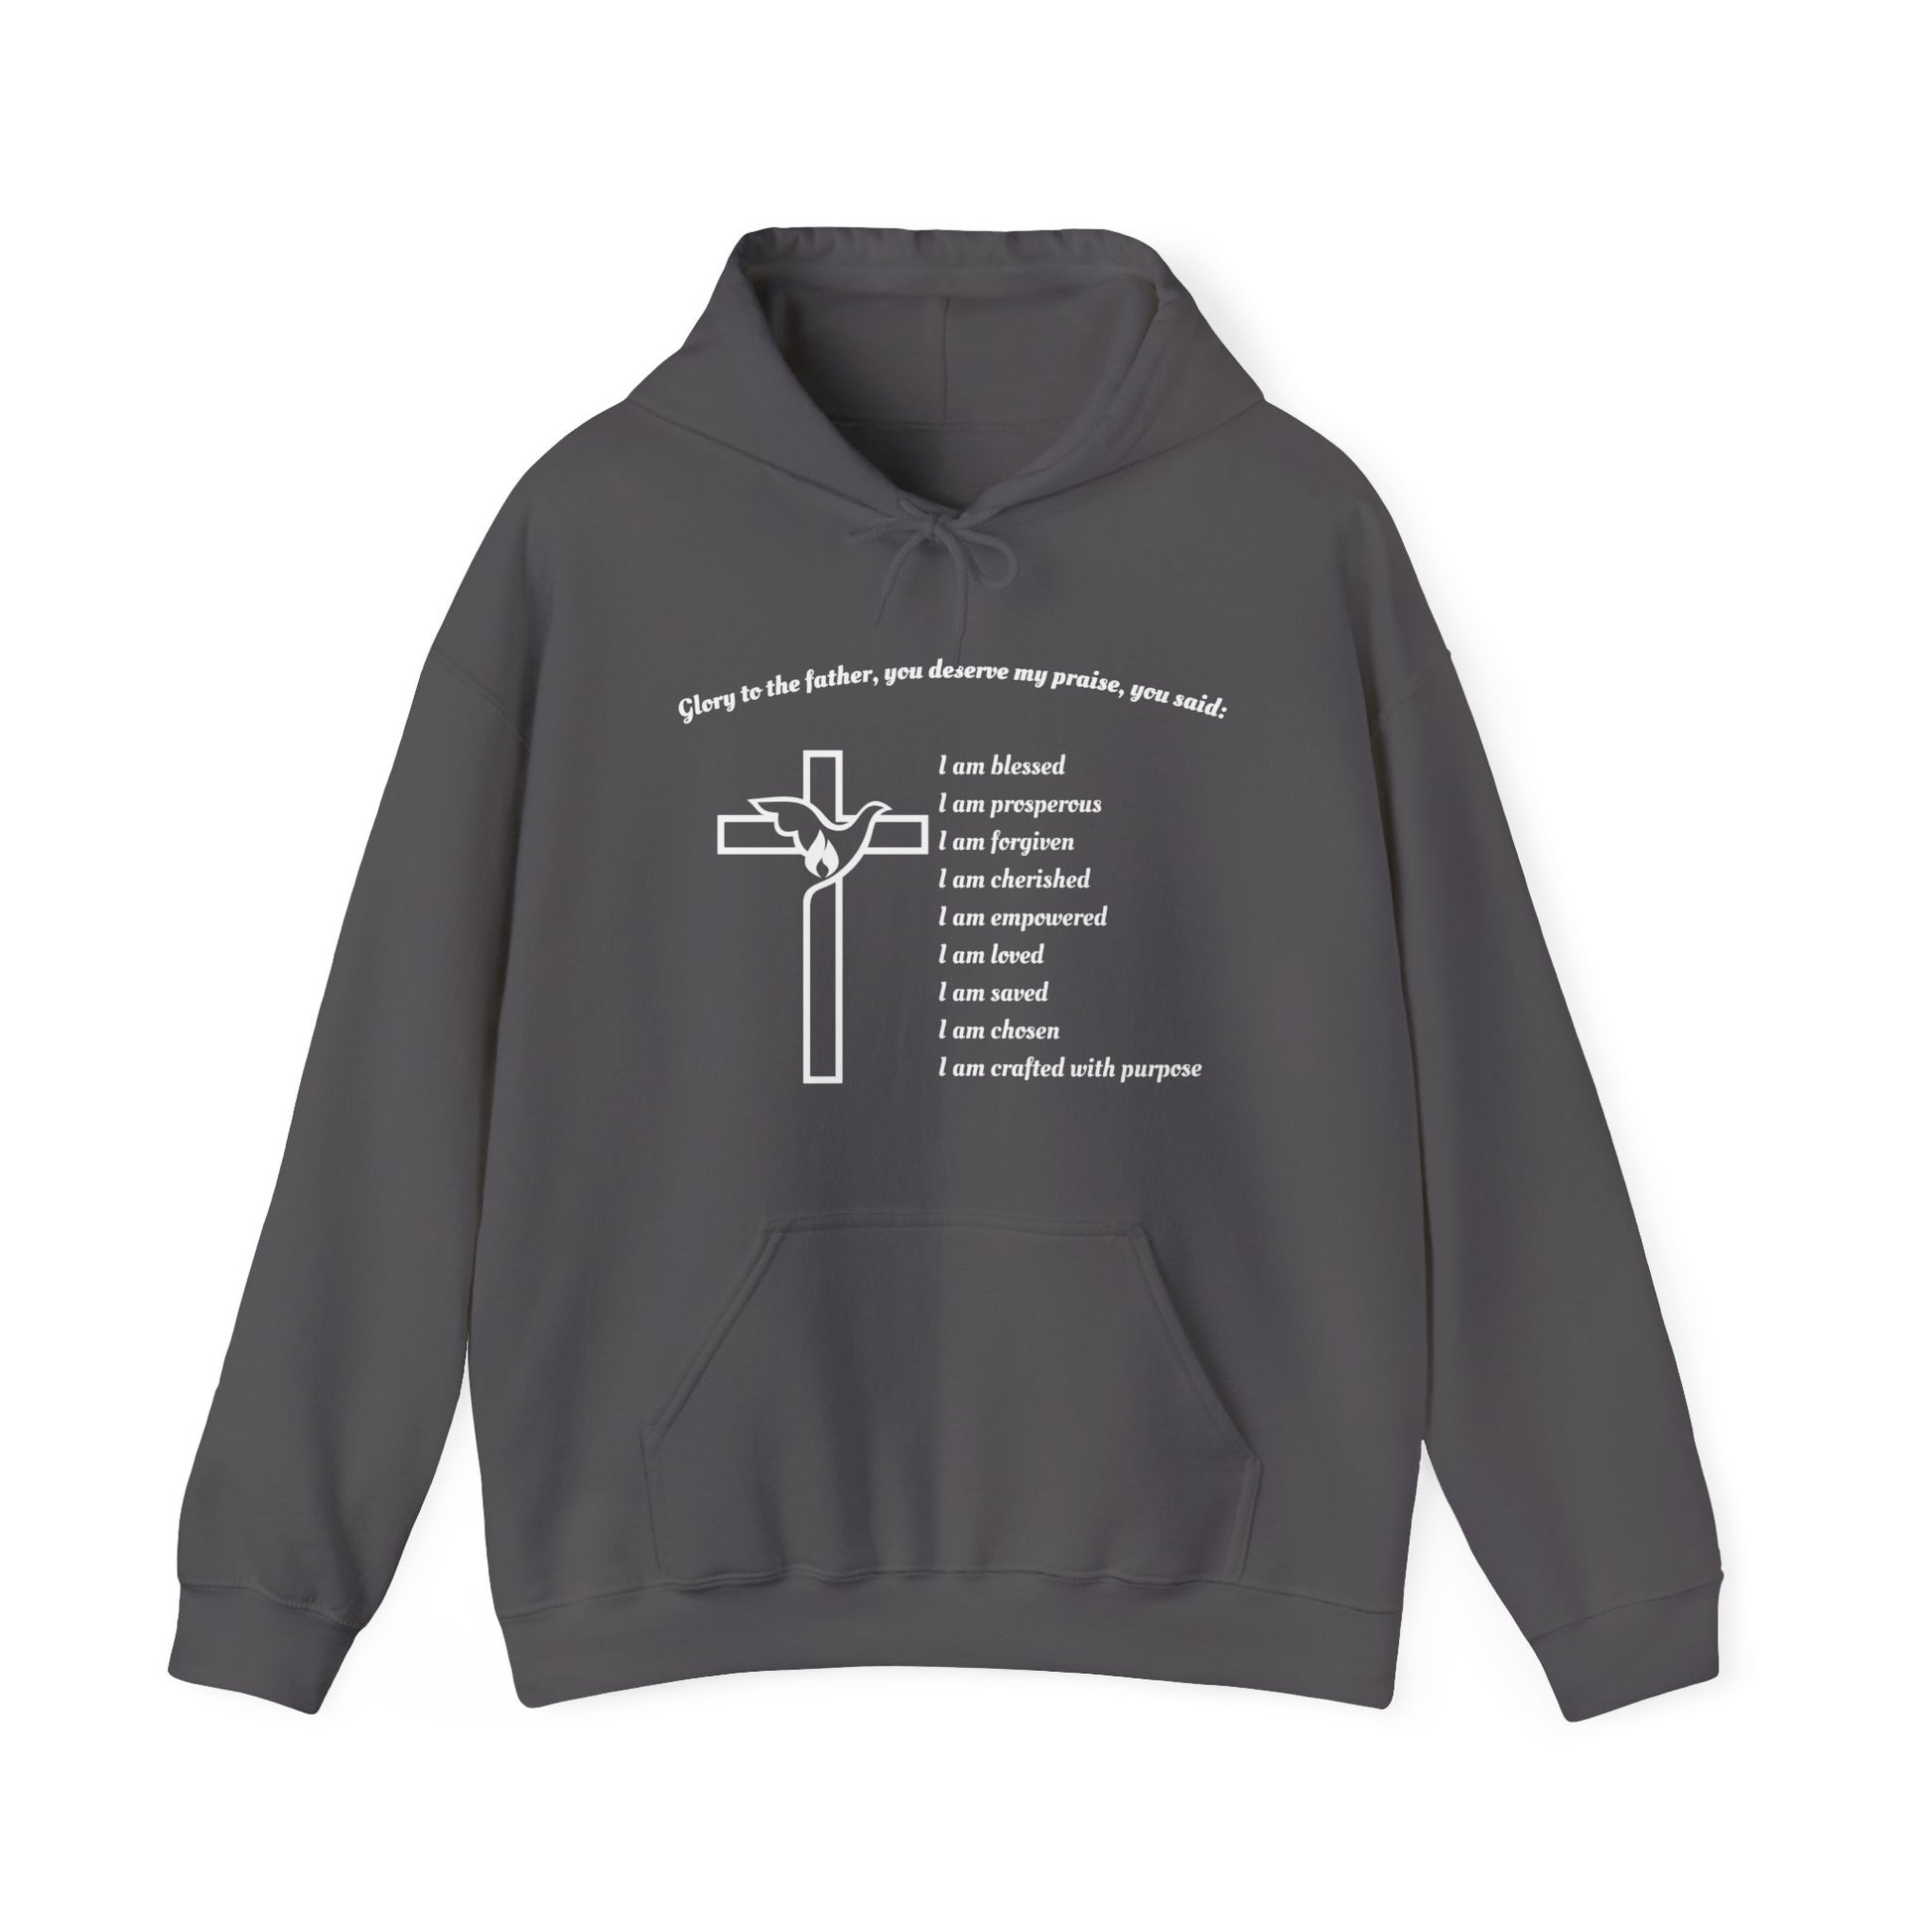 I am Glory to the Father Hooded Sweatshirt Unisex Cozy Heavy Blend25